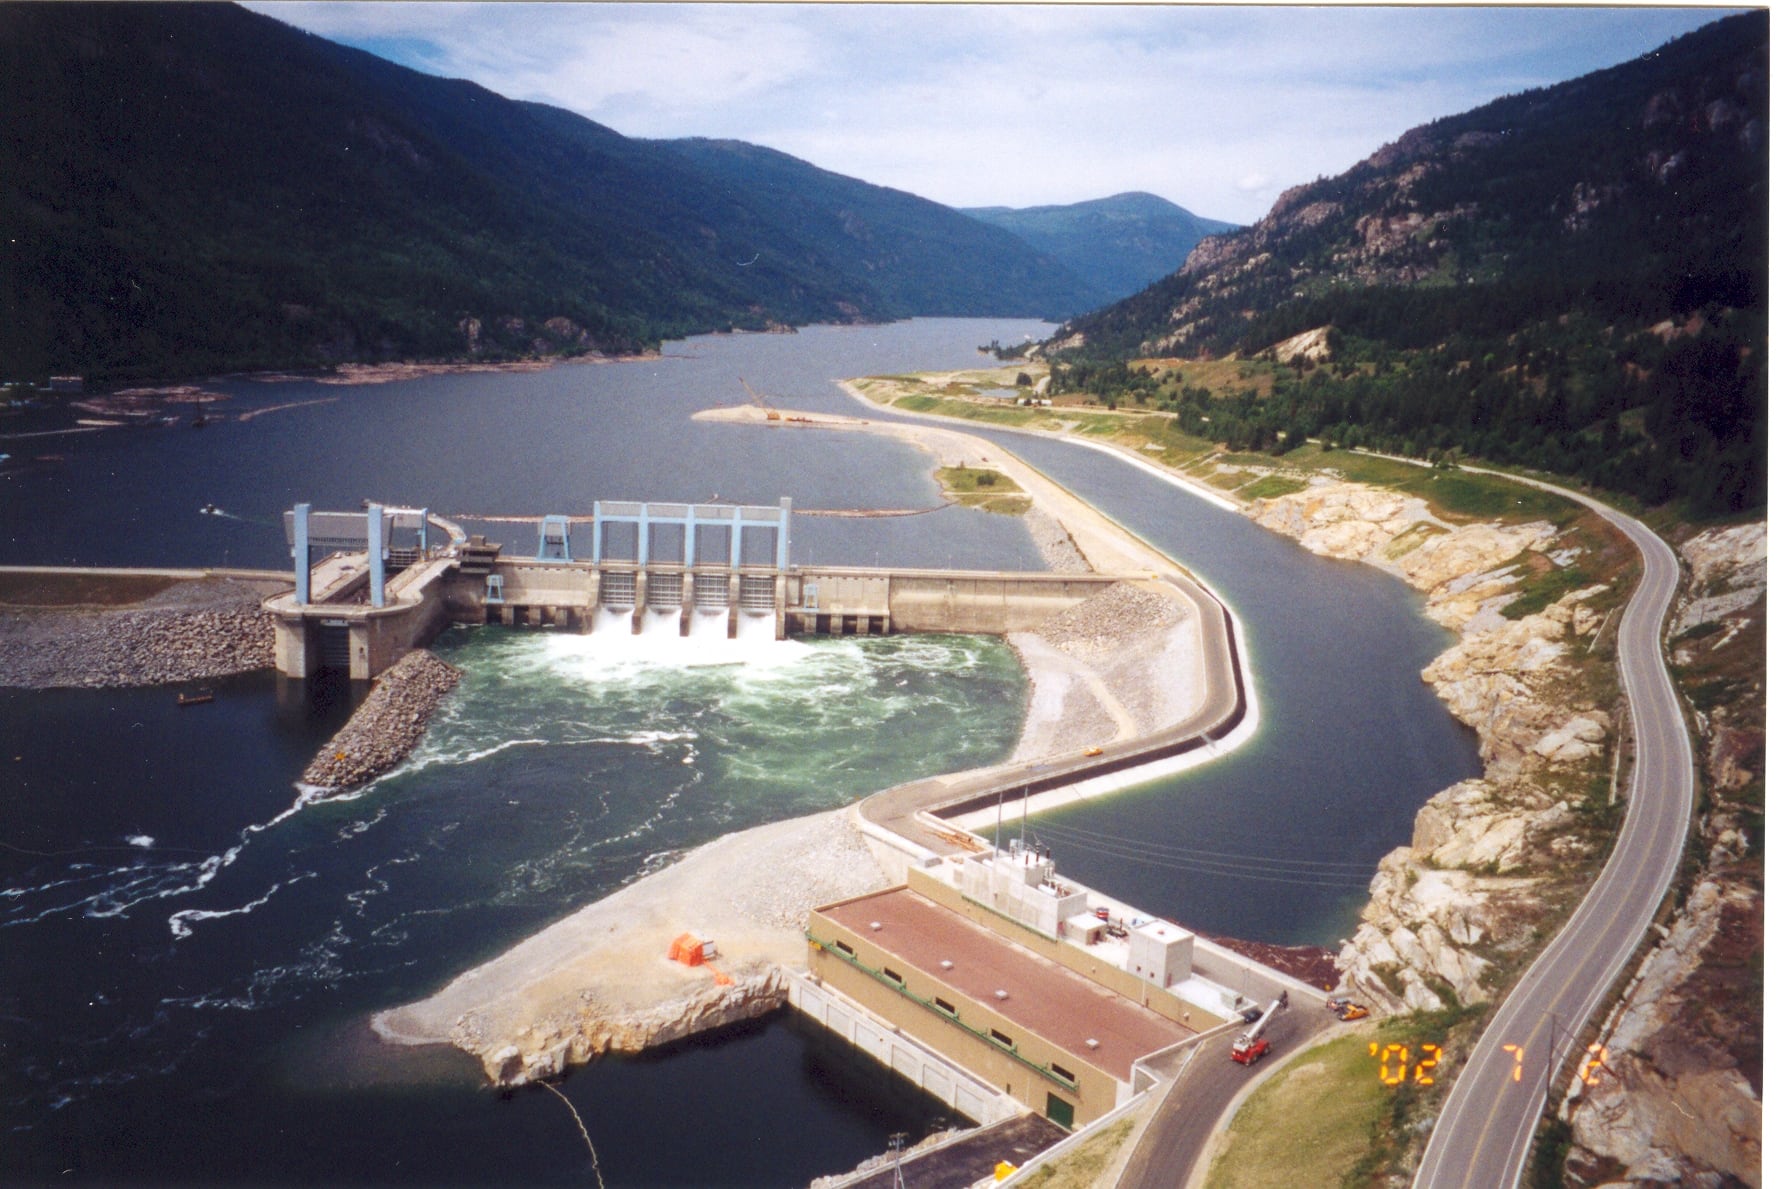 BC Hydro’s mitigation efforts in response to severe drought on Arrow Lakes Reservoir